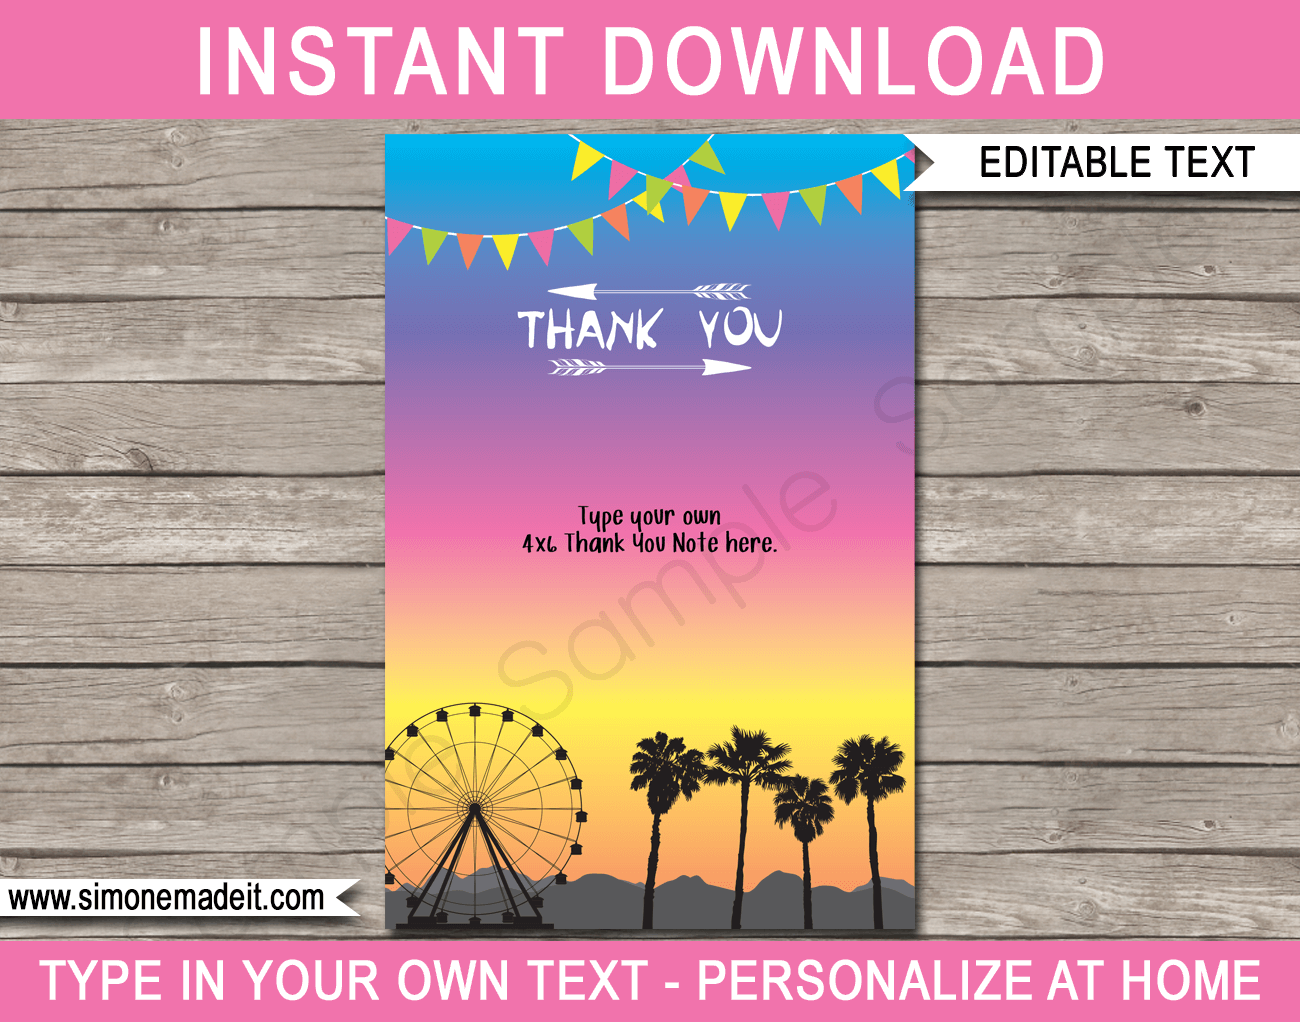 Festival Party Thank You Cards - editable & printable template - Festival Inspired Birthday Party - Instant Download via simonemadeit.com